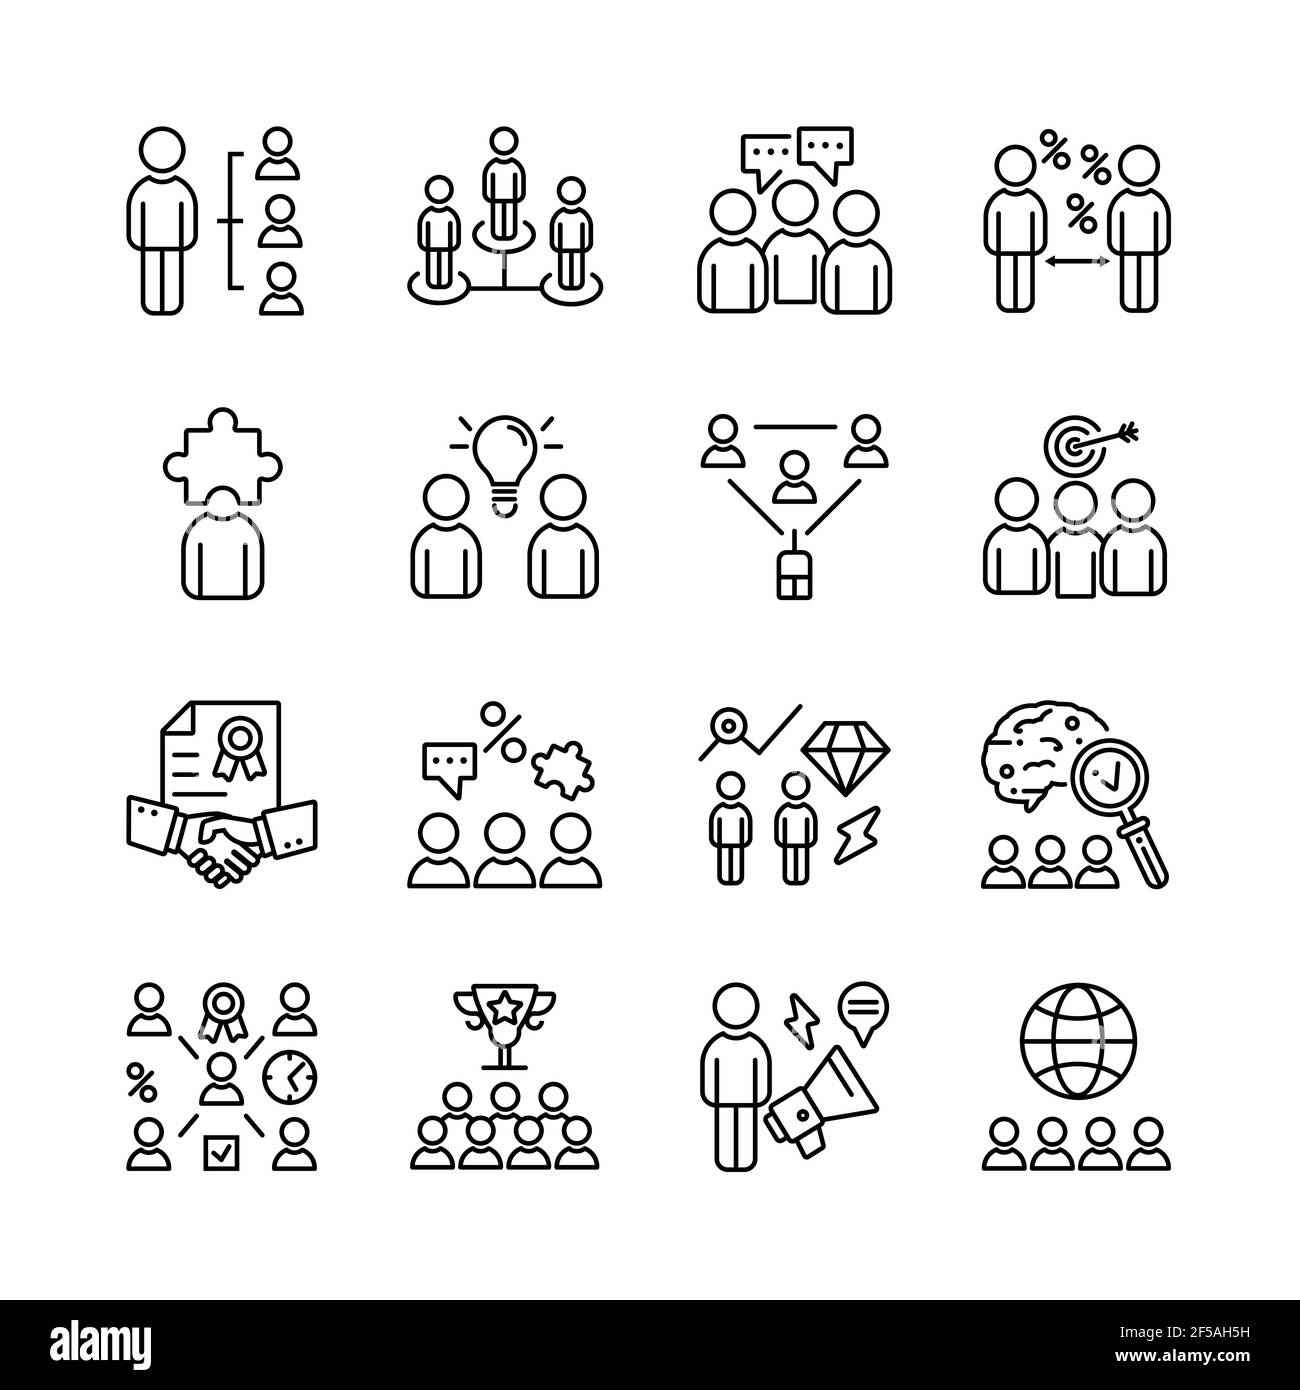 Business teamwork,conference,classroom,team building.Line icon set. Stock Vector